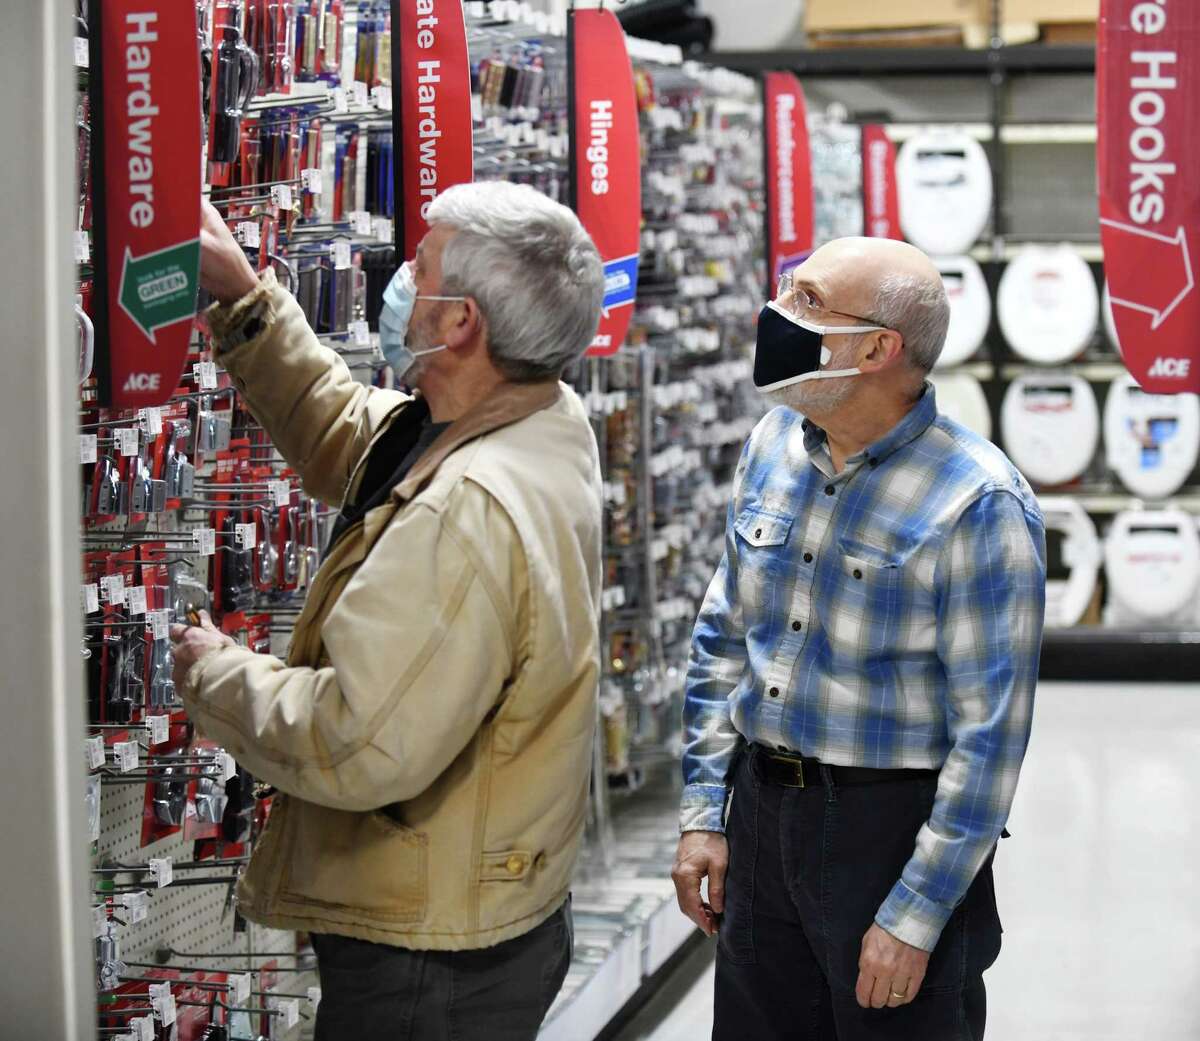 Former Karp's Ace Hardware owner David Fogel assists a customer at the new Rocky's Ace Hardware at 485 Hope St., in Stamford, Conn., on Wednesday, Jan. 5, 2022. Karp’s Ace Hardware, a family-owned-and-operated business for more than 95 years, announced Wednesday that it had been purchased by Rocky’s Ace Hardware, one of the country’s largest family-owned Ace Hardware dealers.